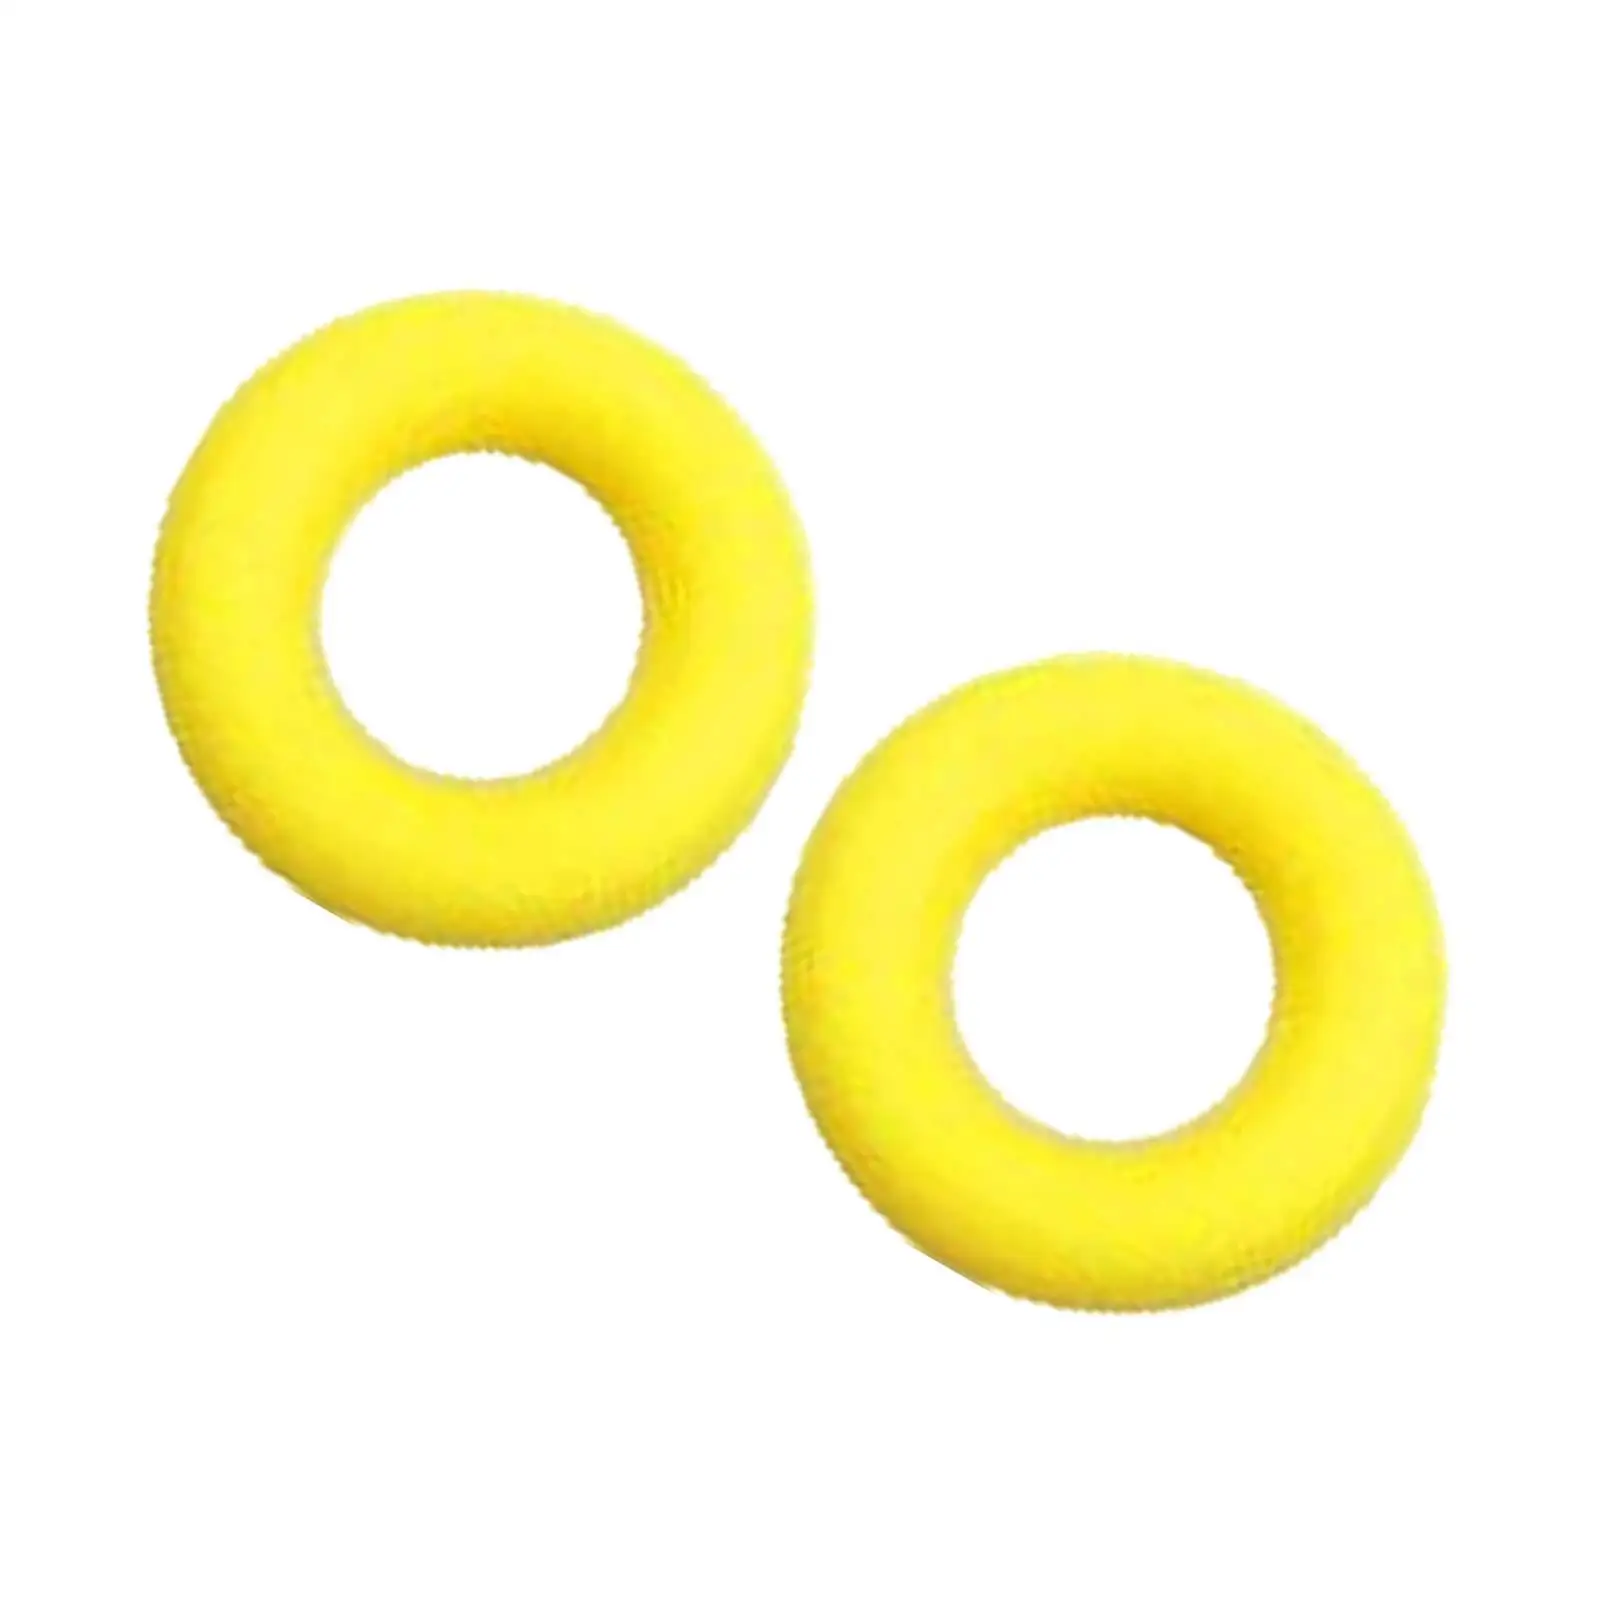 2 Pieces Glasses Ear Grips Round Ear Clips Anti Slip for Spectacles Children Adults